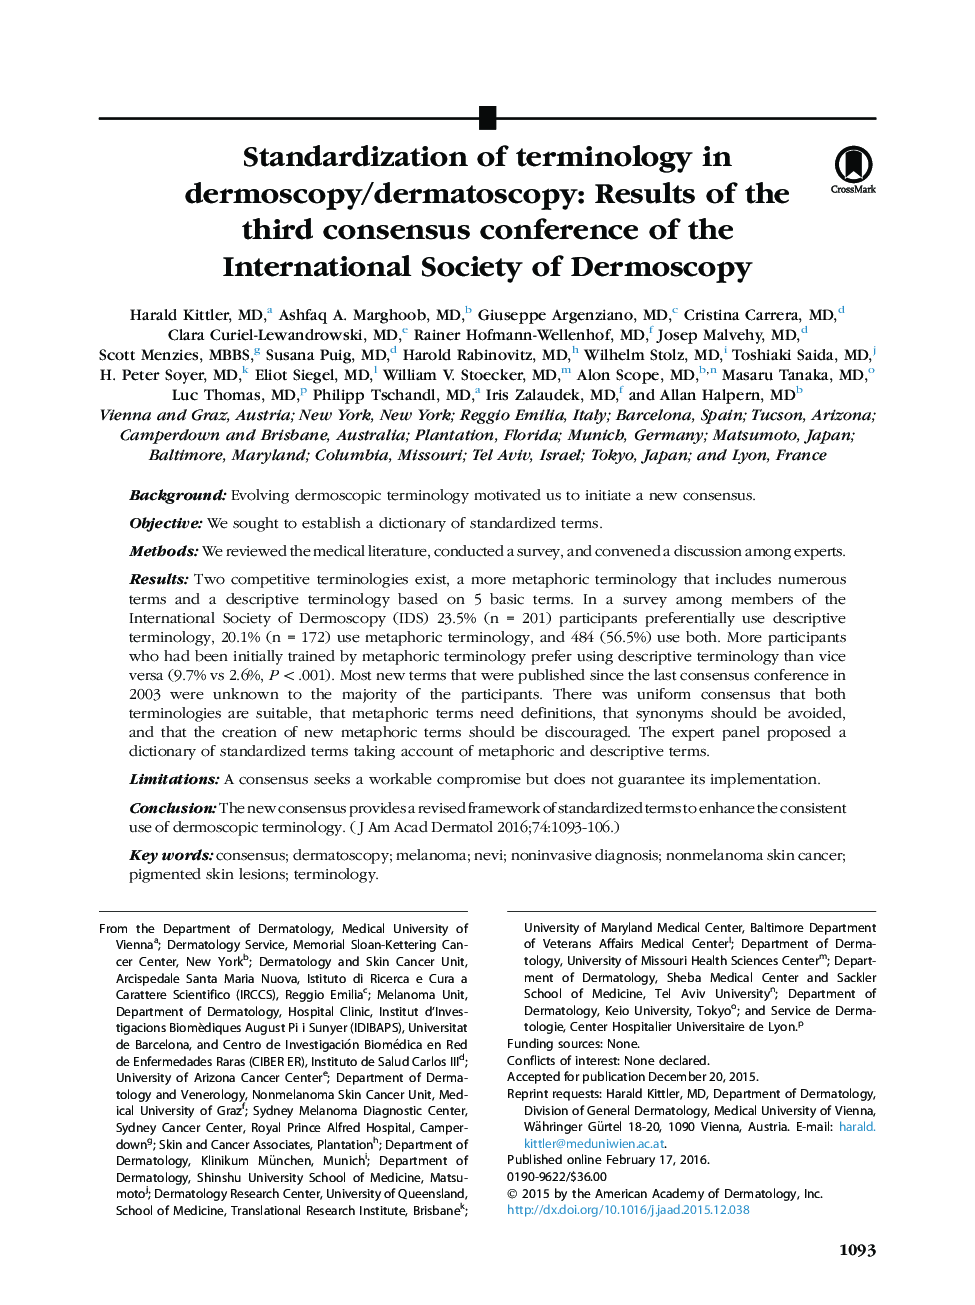 Original articleStandardization of terminology in dermoscopy/dermatoscopy: Results of the third consensus conference of the International Society of Dermoscopy